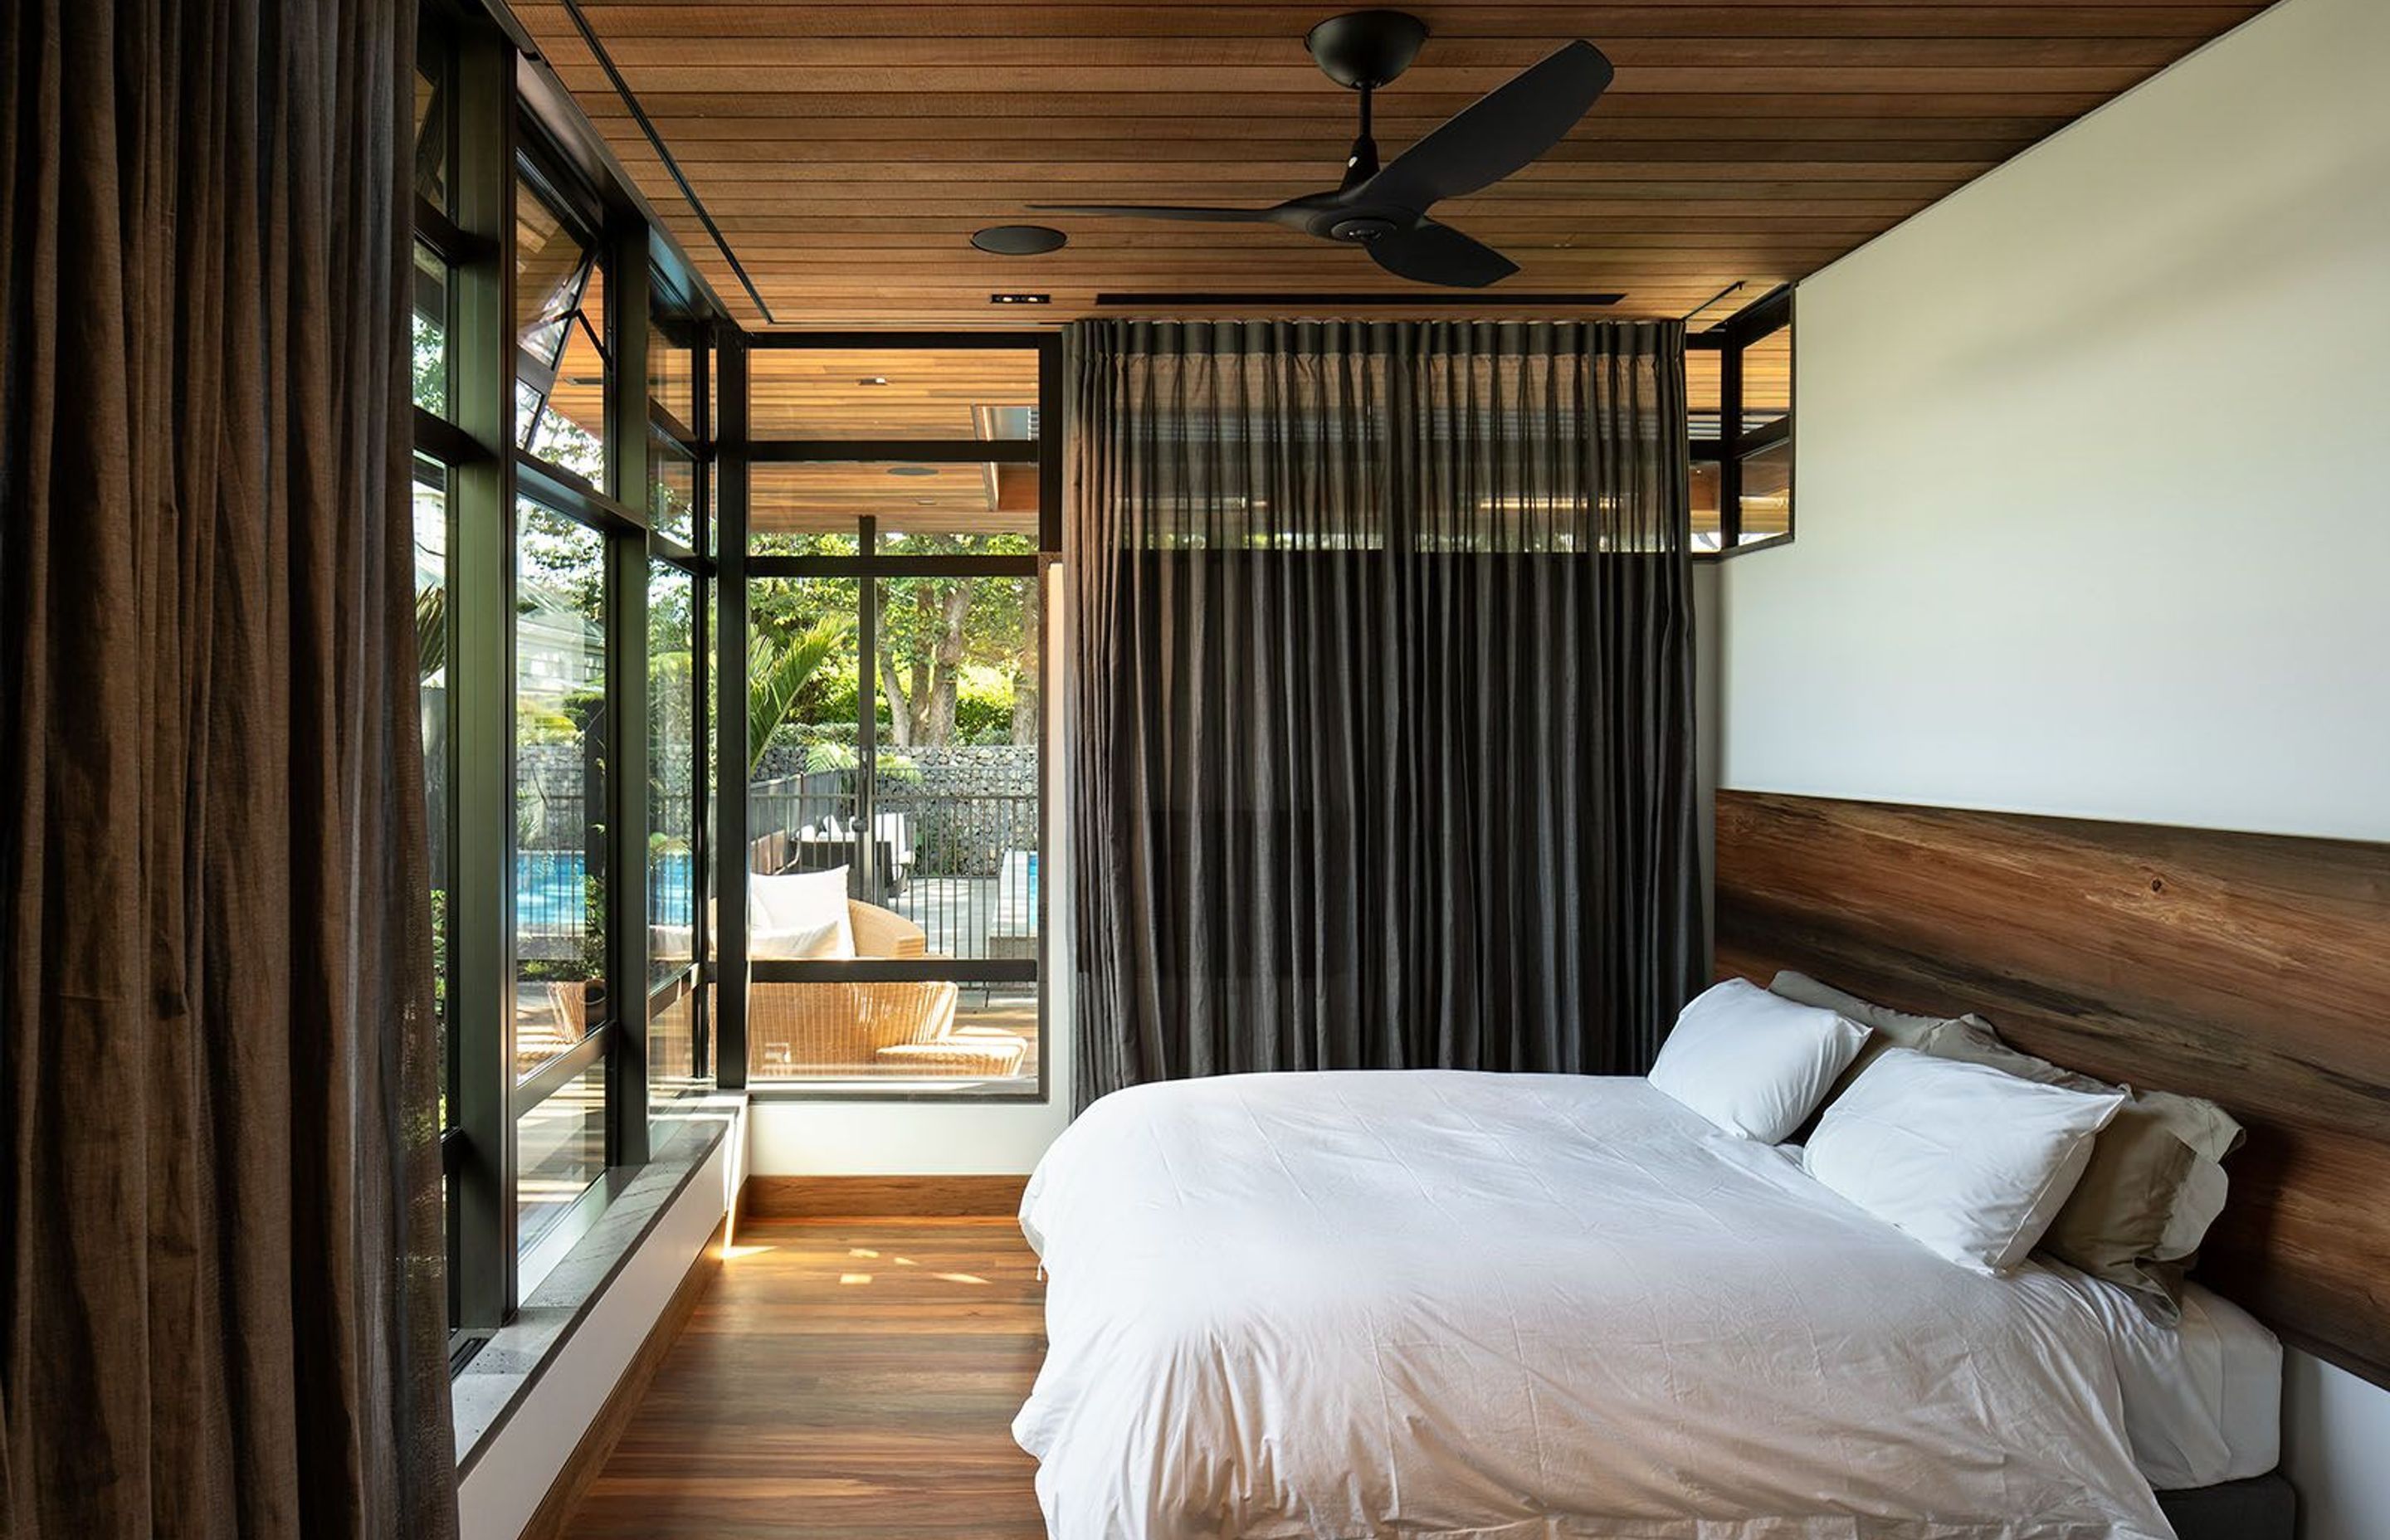 The bedroom looks out to the outdoor pool and a BBQ and seating area. The totara timber ceiling continues outside into the soffit of the exterior.